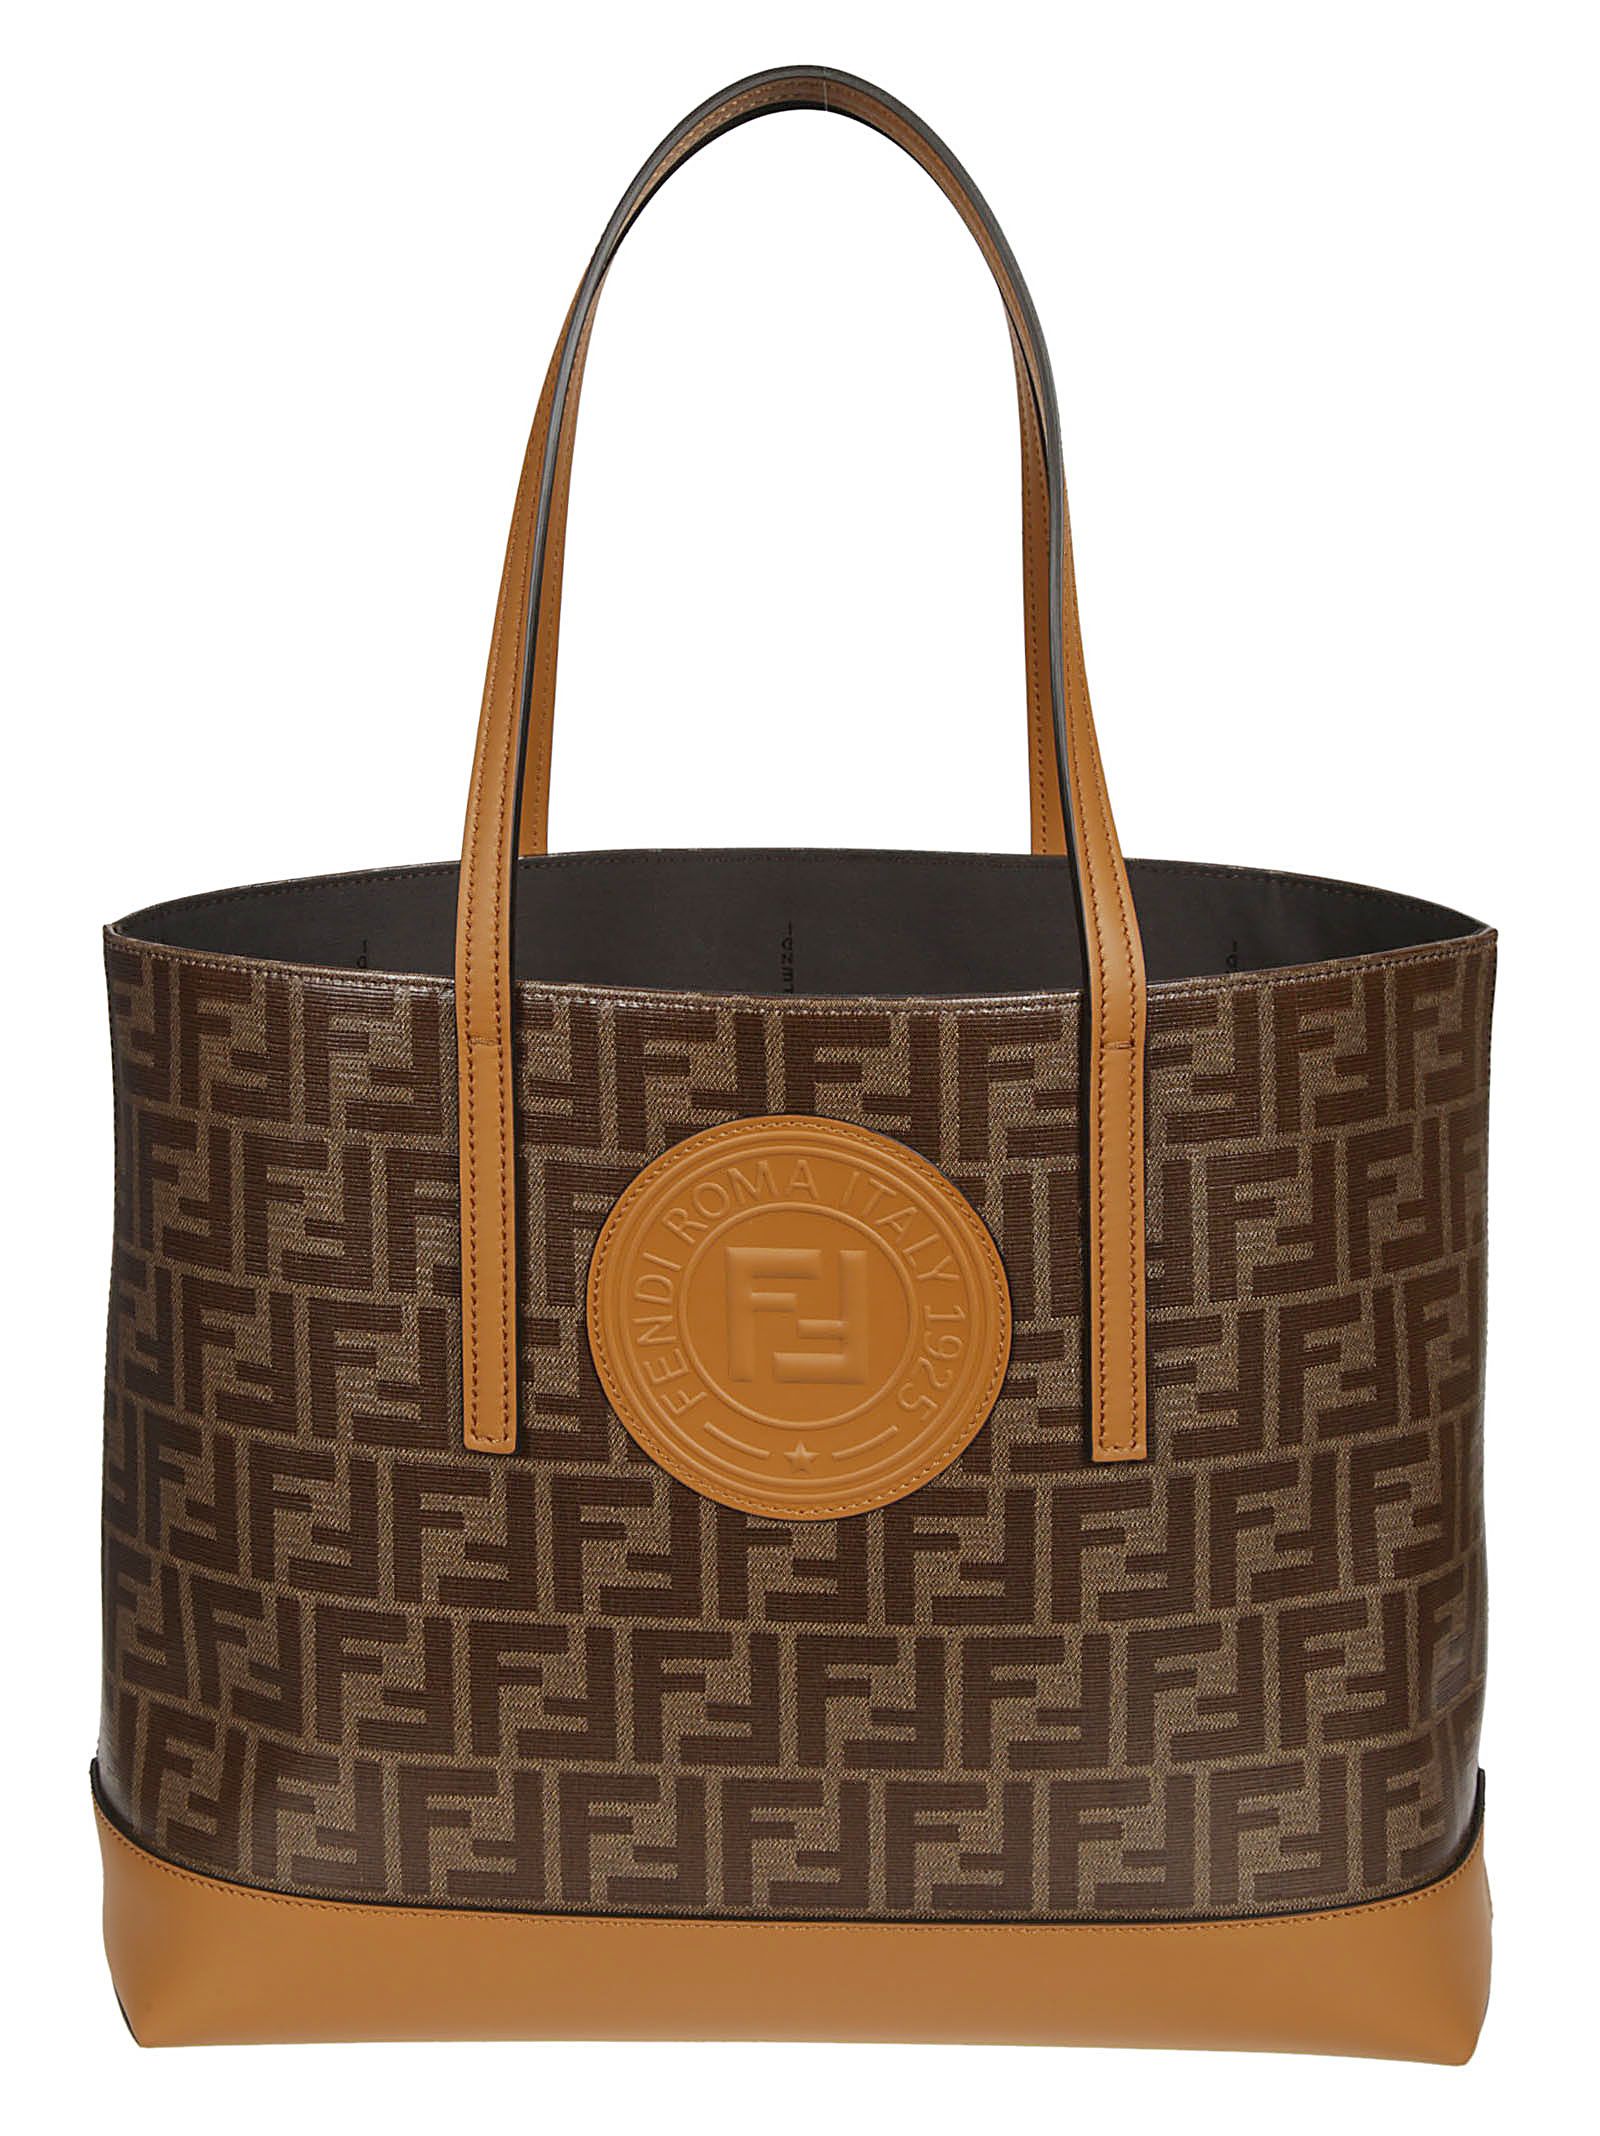 double f logo tote in brown